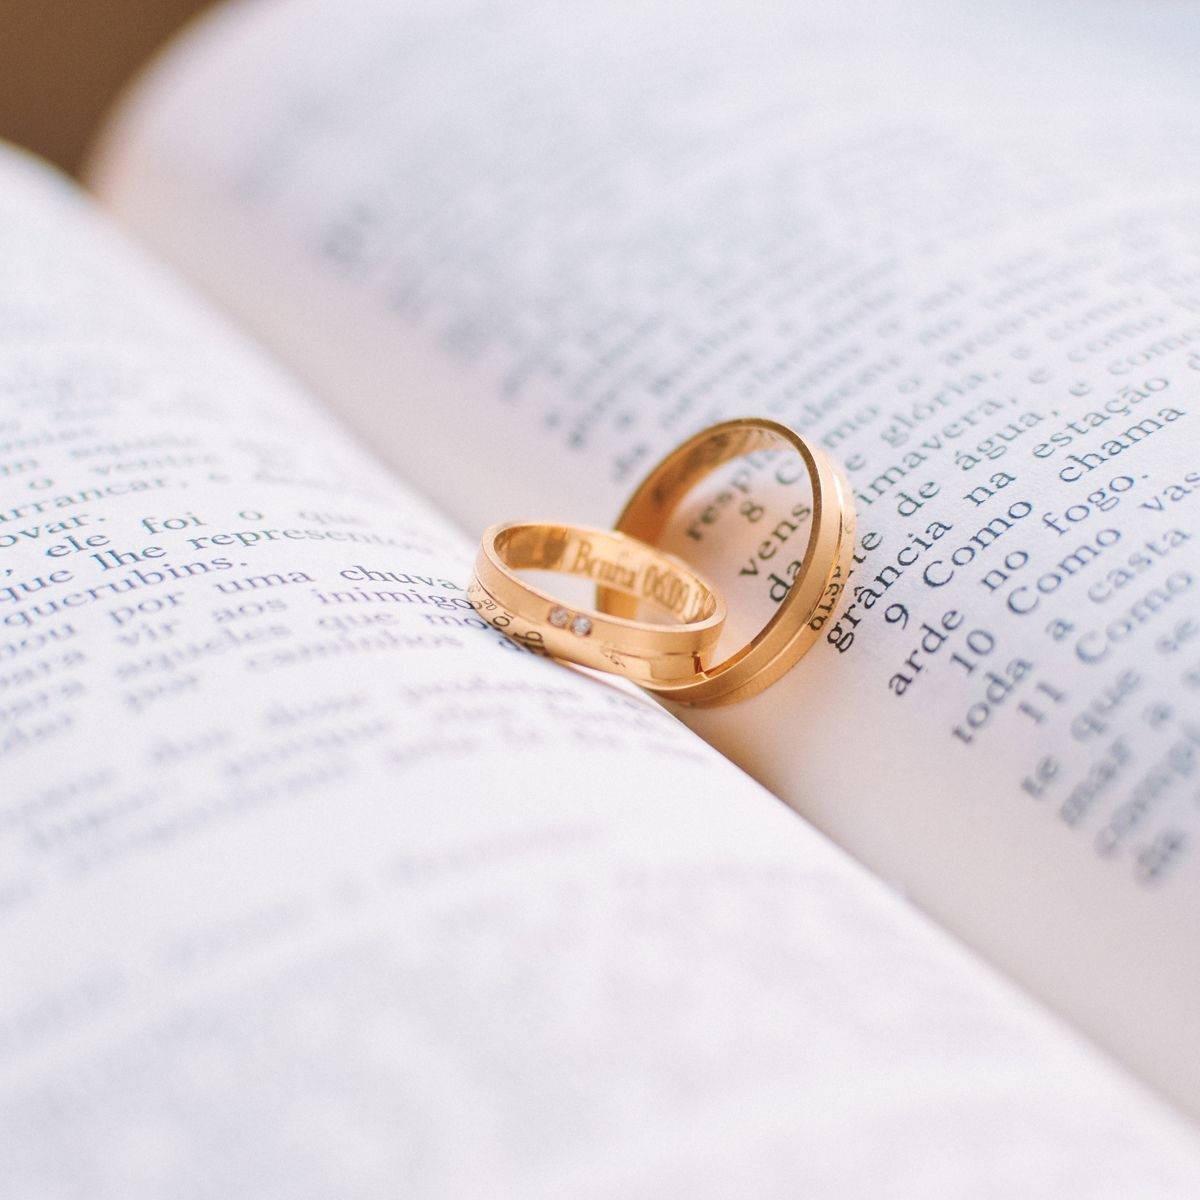 Gold Wedding Rings On Book Wallpaper